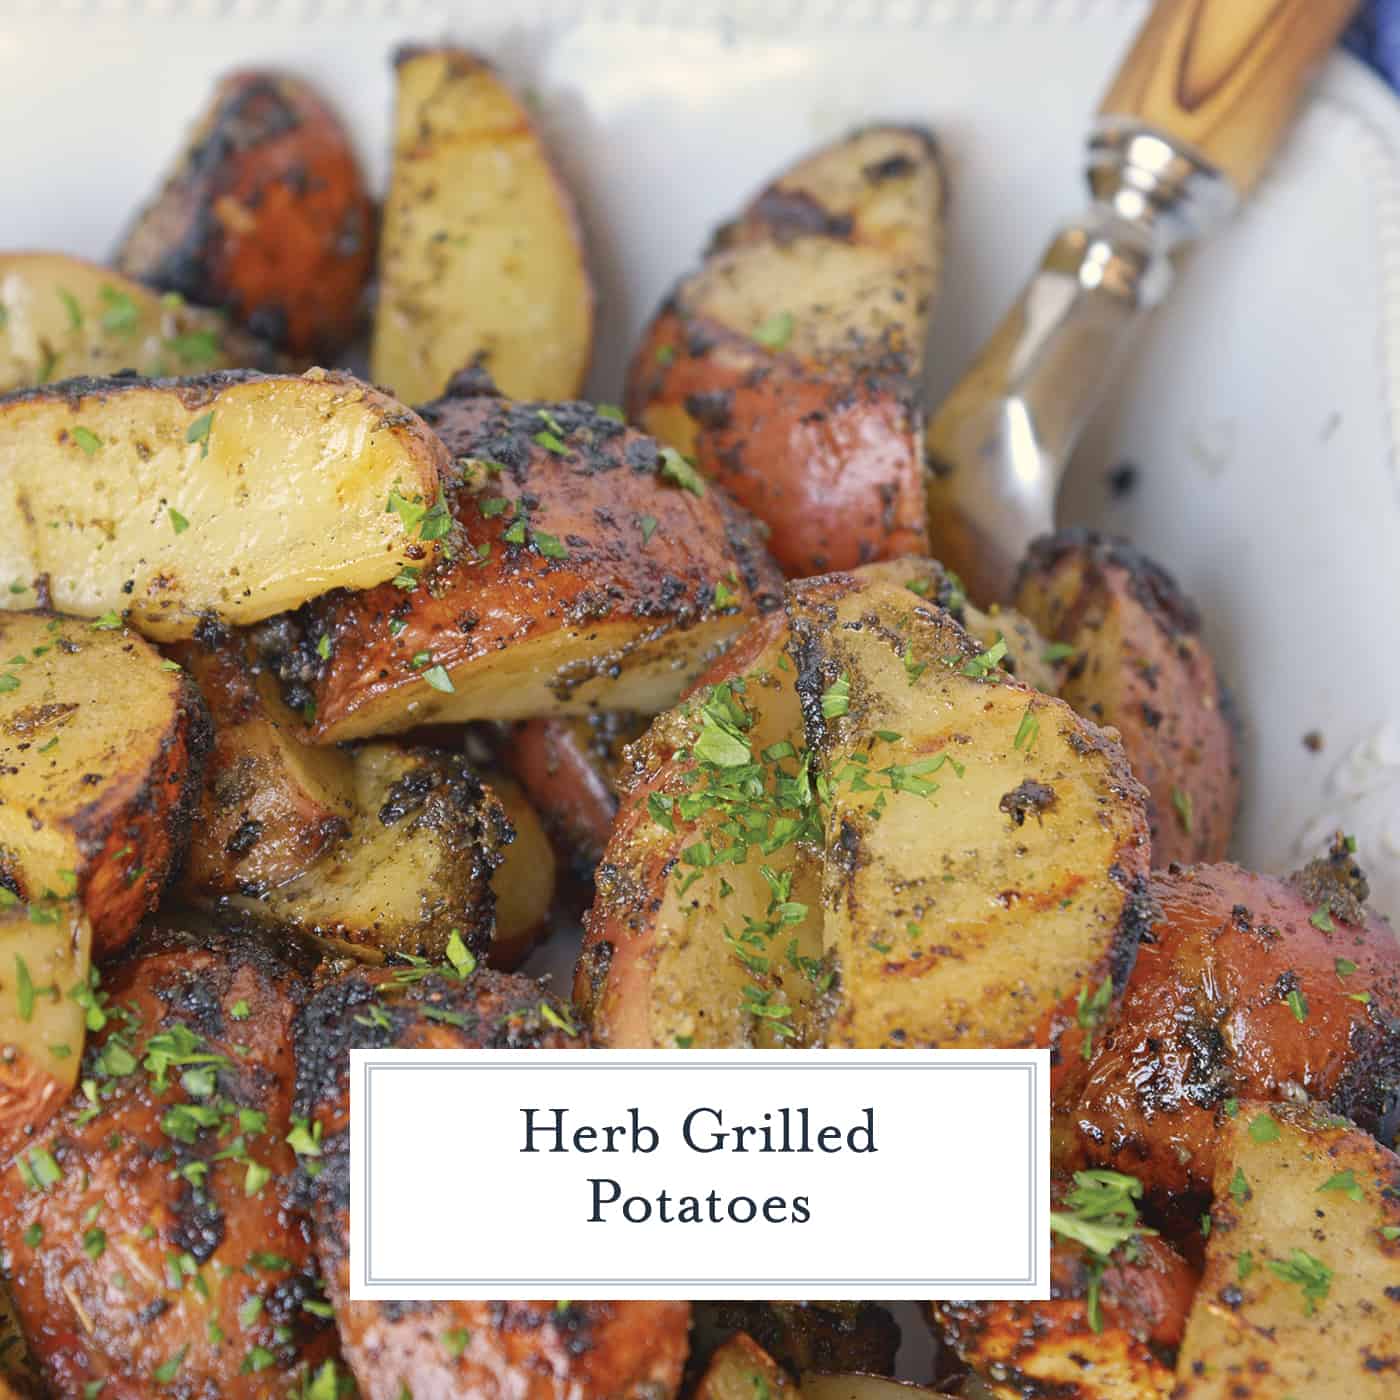 Herb Grilled Potatoes uses miracle whip and a handful of spices to keep those spuds nice and moist with loads of flavor! Make this easy side dish today! #grilledpotatoes #grilledpotatowedges www.savoryexperiments.com